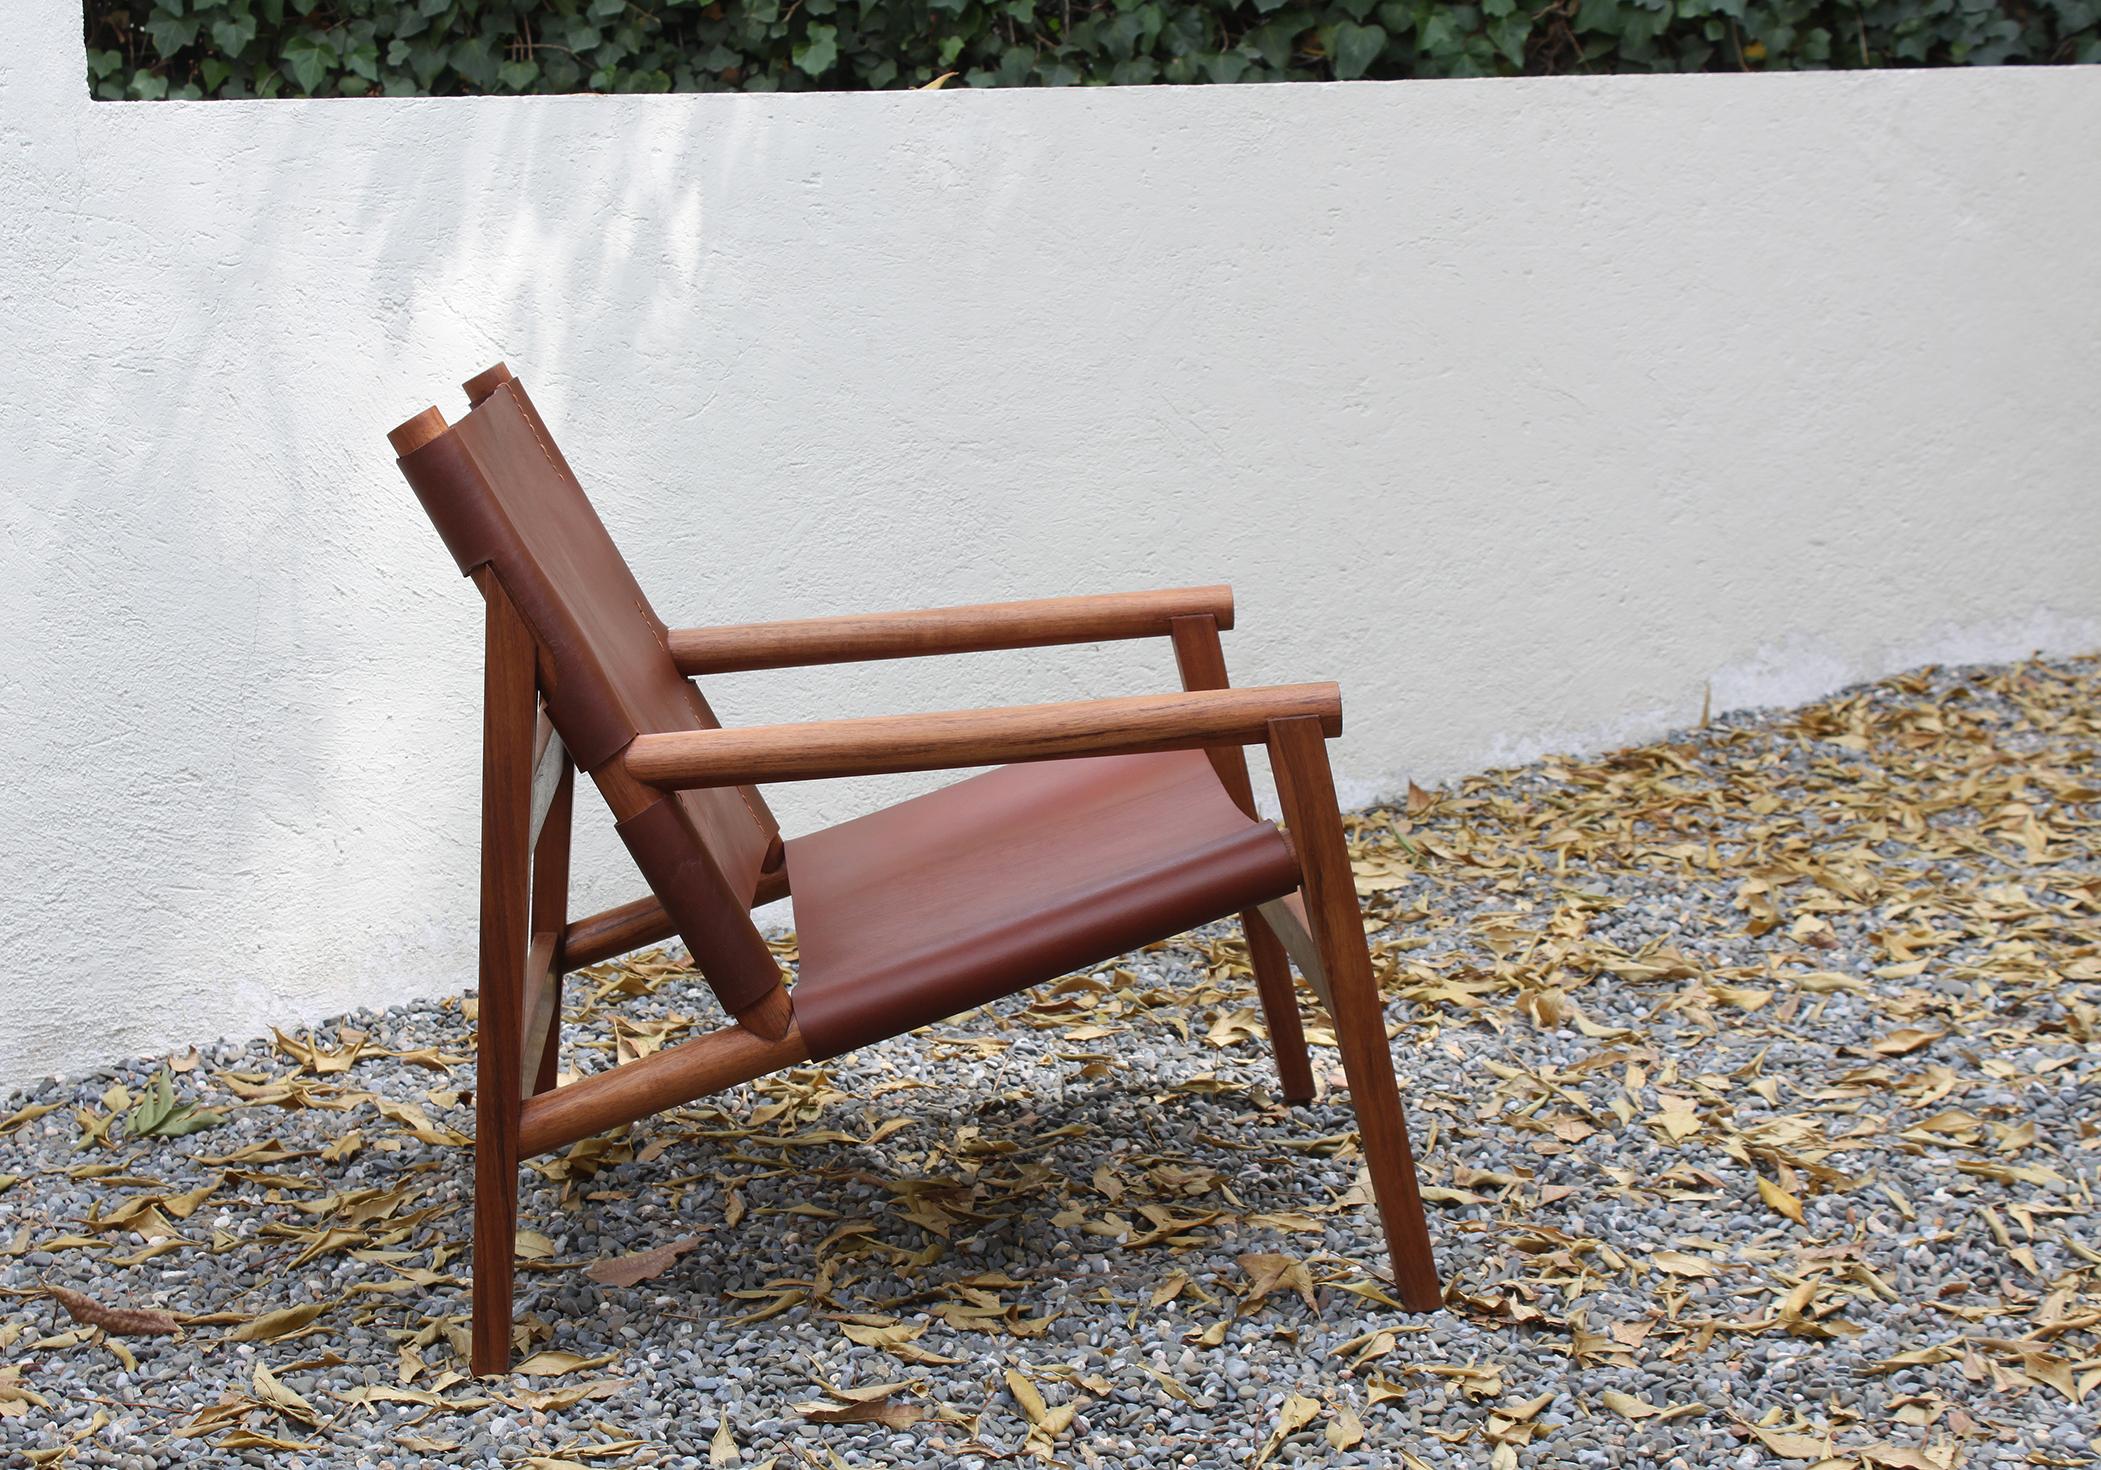 La Colima Chair, Maria Beckmann, Represented by Tuleste Factory For Sale 5